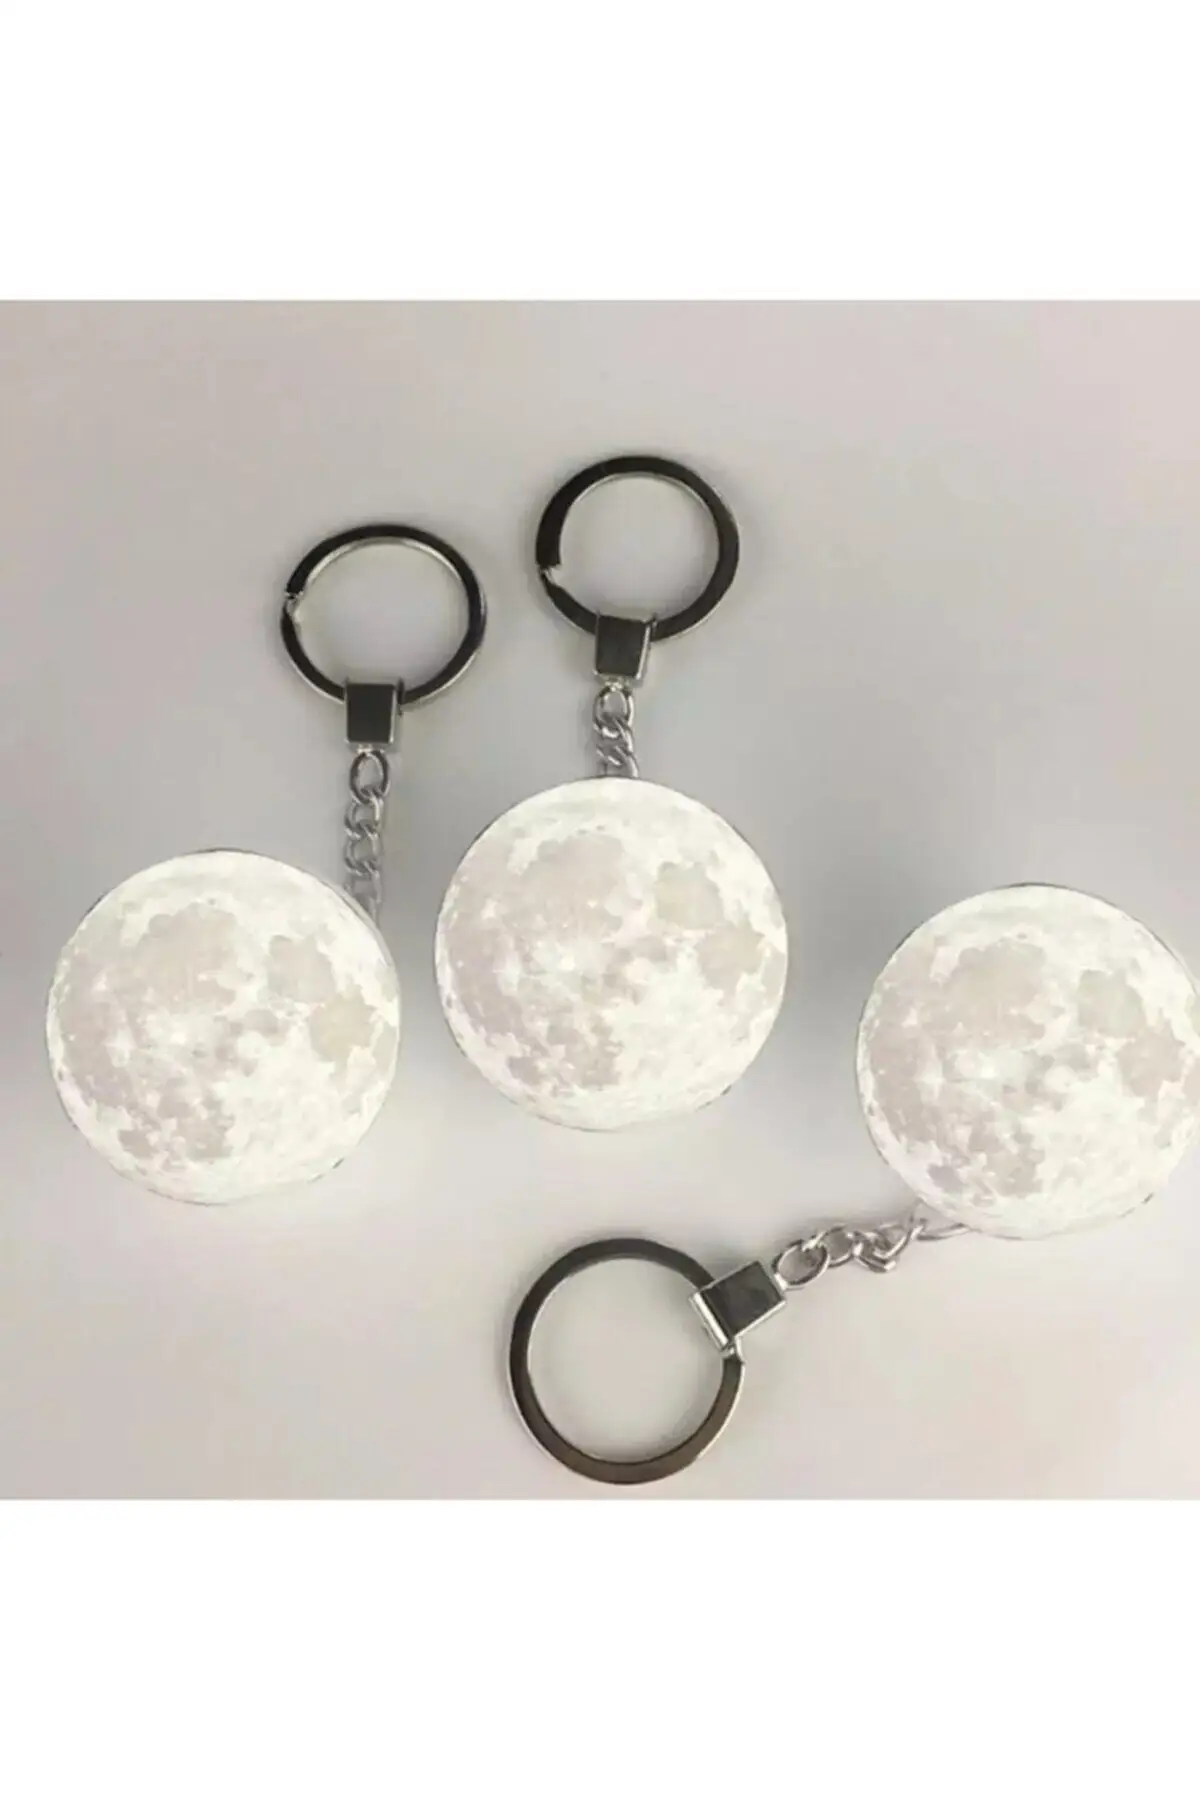 3d Moon Lamp Luminous Moon Keychain Gift Products Light Emitting Mini Bulb Home Car Keychains Fashion Jewelry free shipping by dhl 200pcs lot 2020 fashion metal bicycle keychains zinc alloy bicycle keyrings for promotion gifts